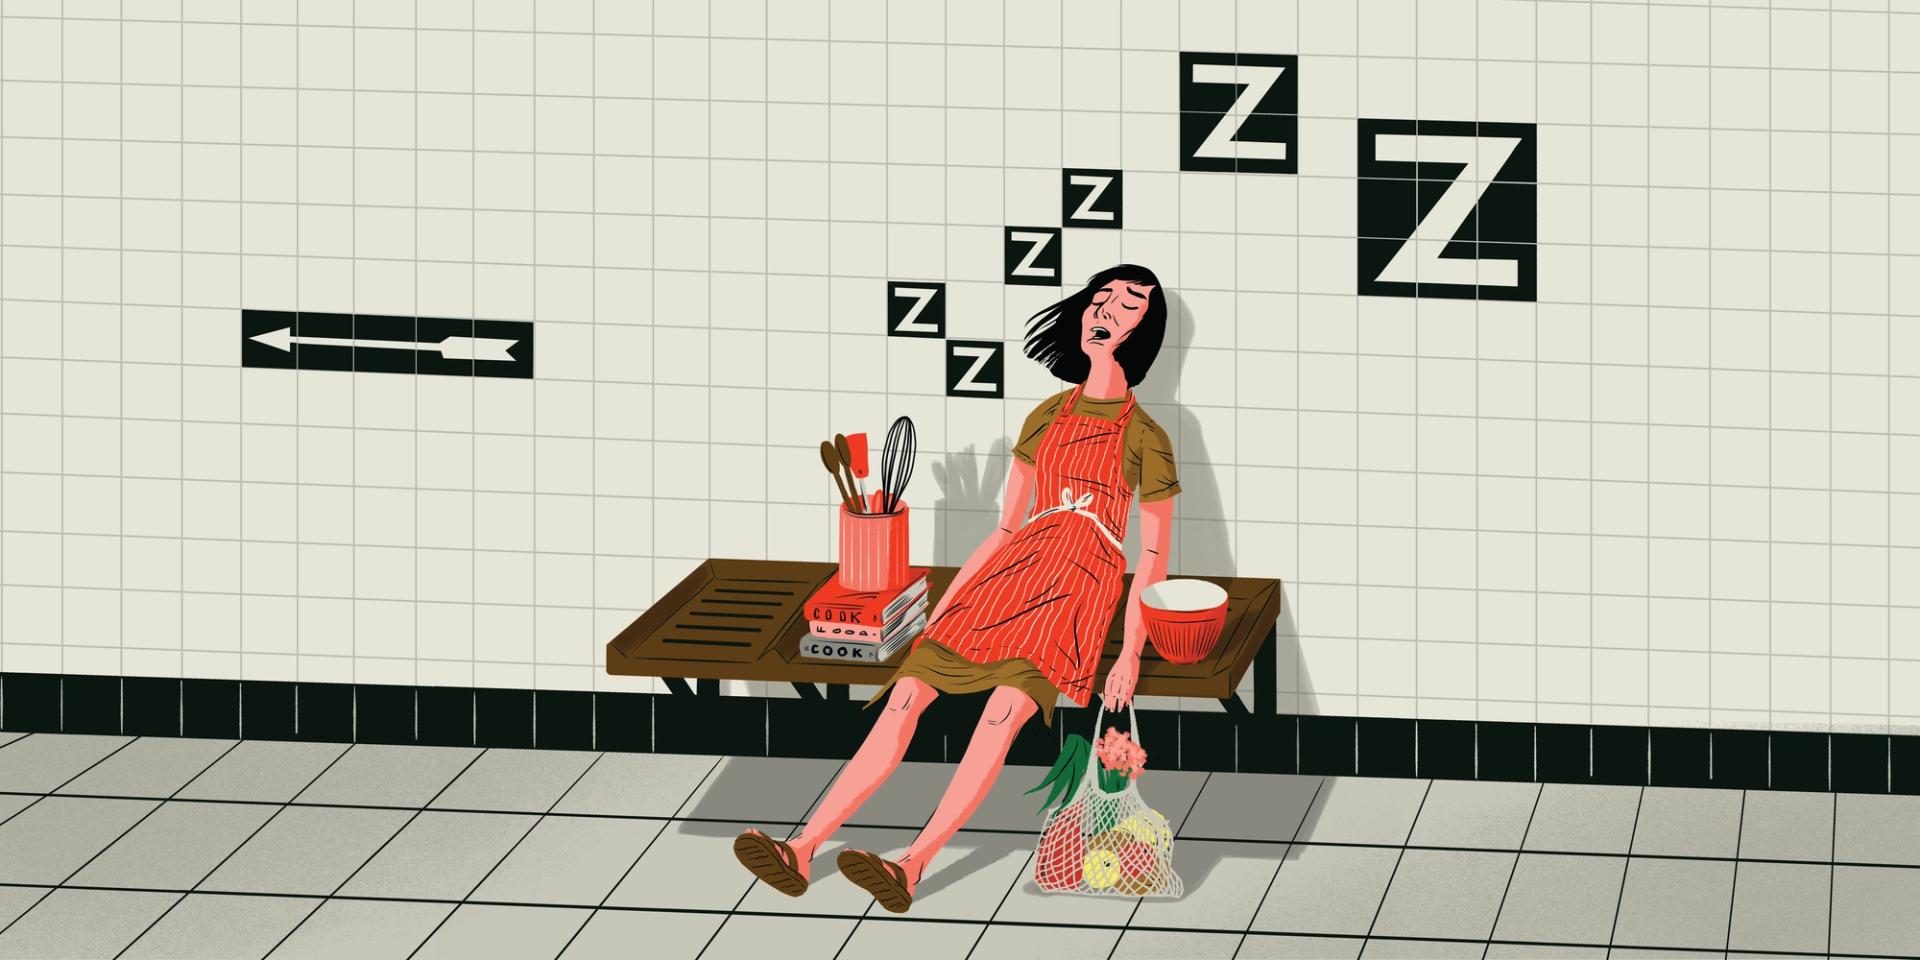 Woman lies exhausted against a white tiled subway wall, with black tiles increasing in size saying 'Z' around her. She is wearing a vermillion apron, with cooking implements around her on the subway bench, holding a net bag of fruit and flowers. There is an arrow in the tiles pointing to the left, away from her